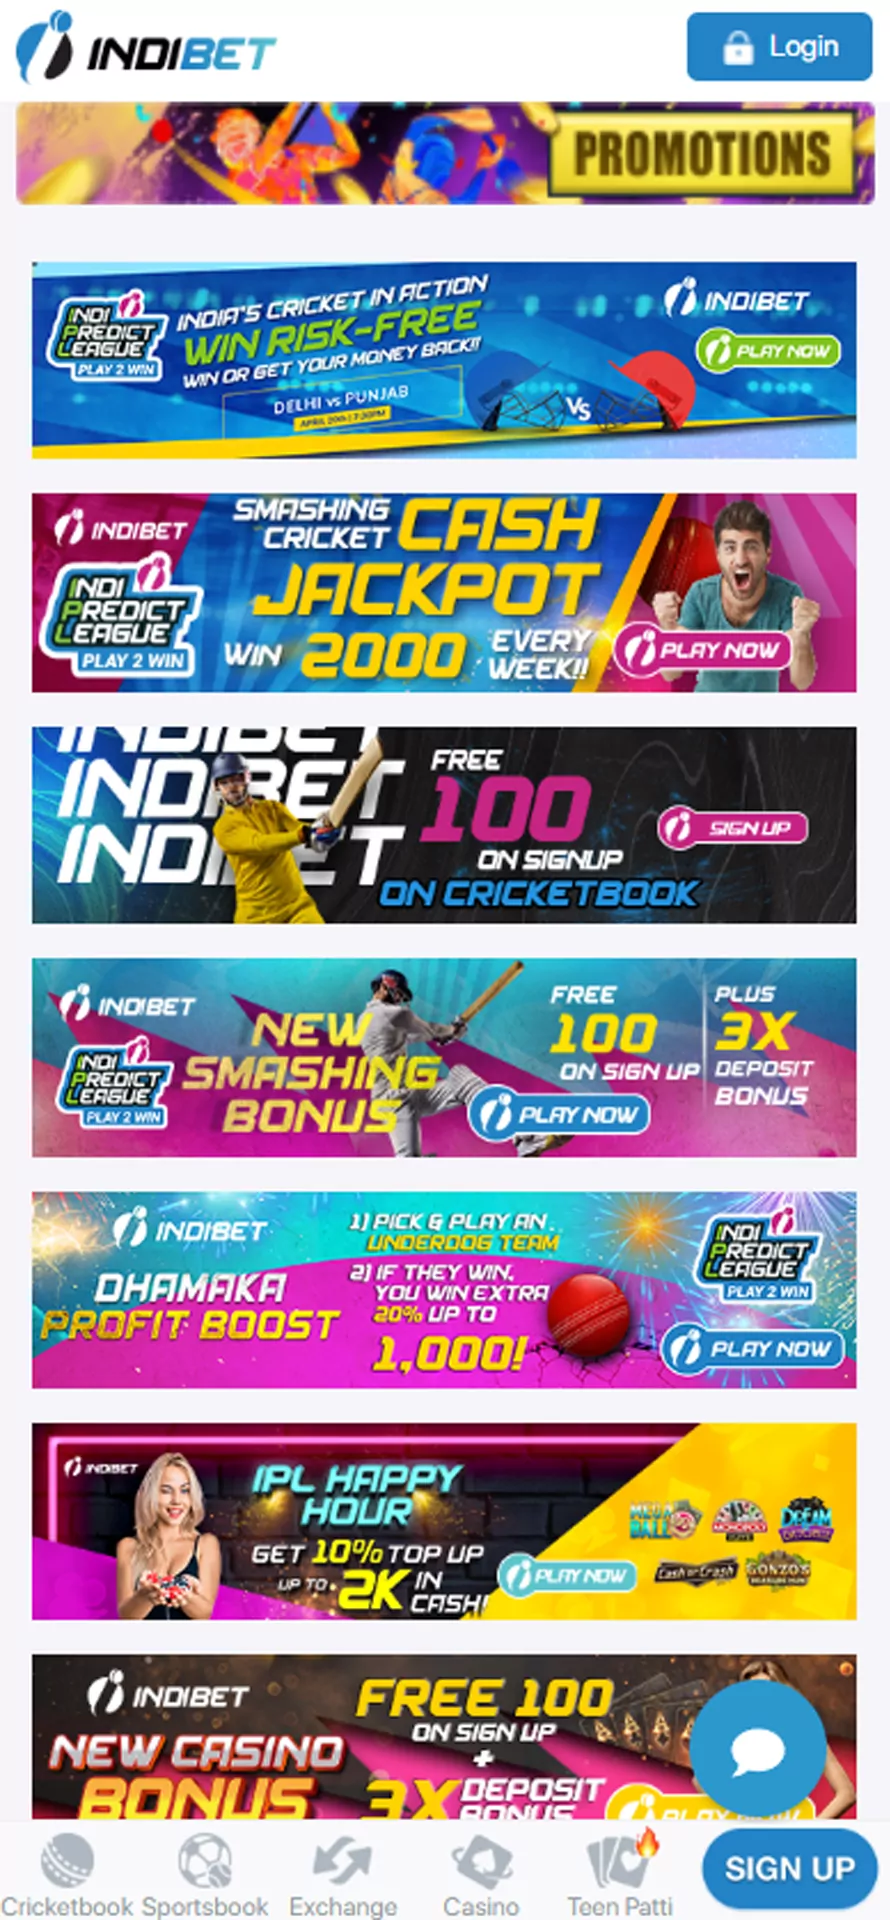 Check promotions at Indibet.